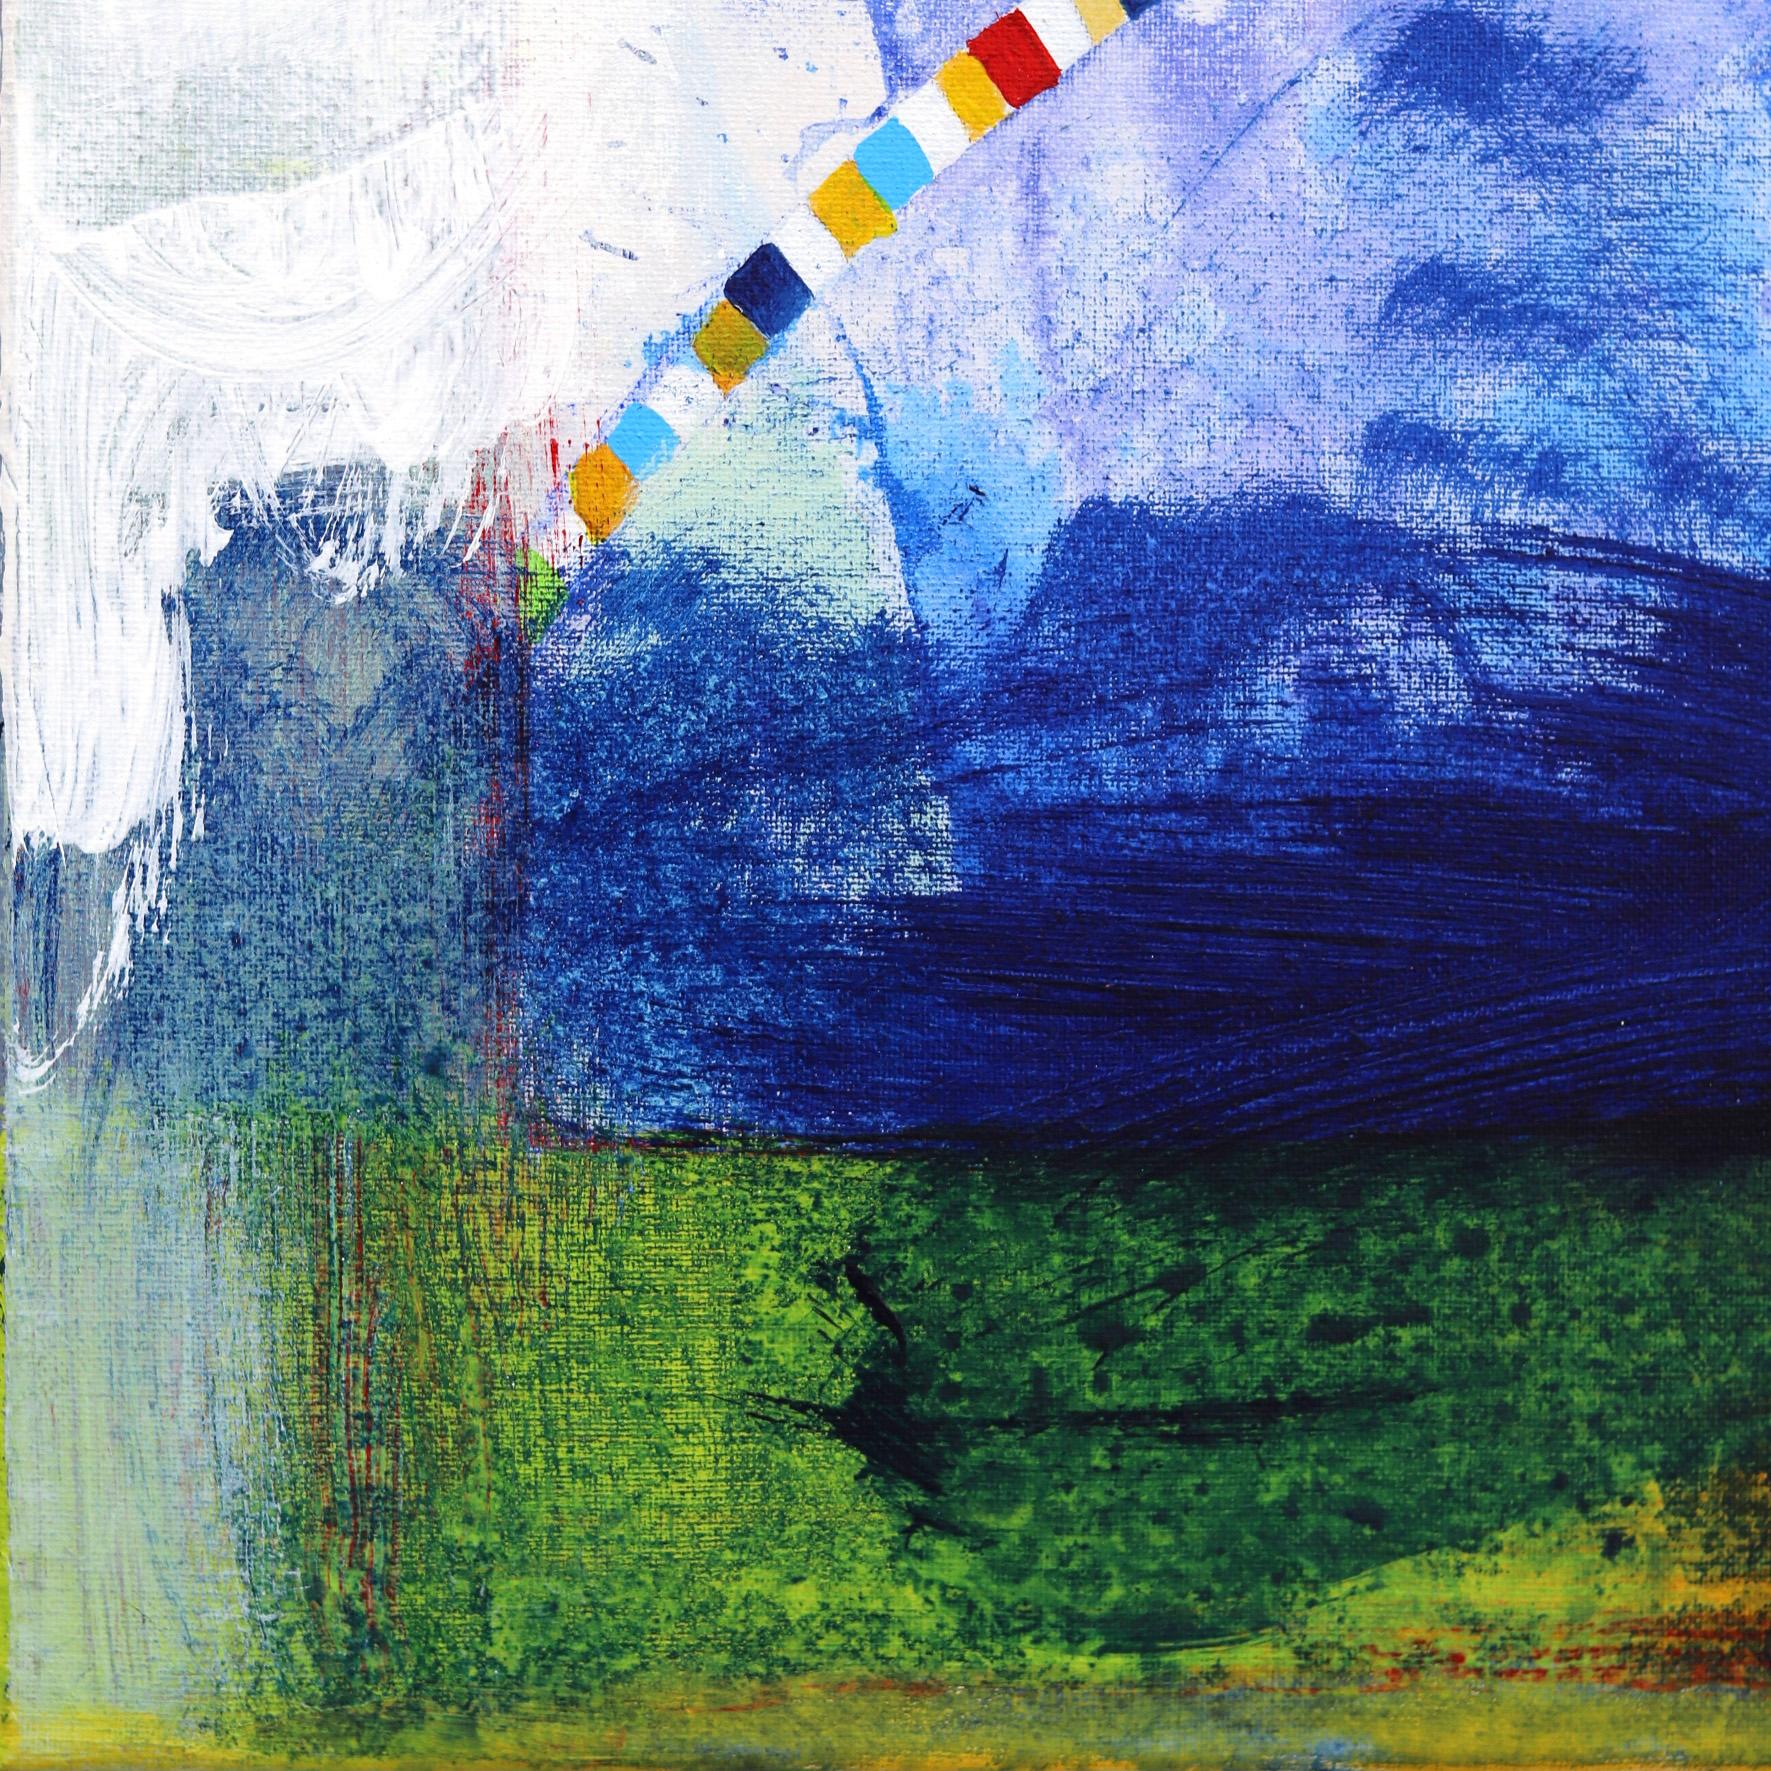 Prayer Flags #3 - Gray Abstract Painting by Jodi Fuchs